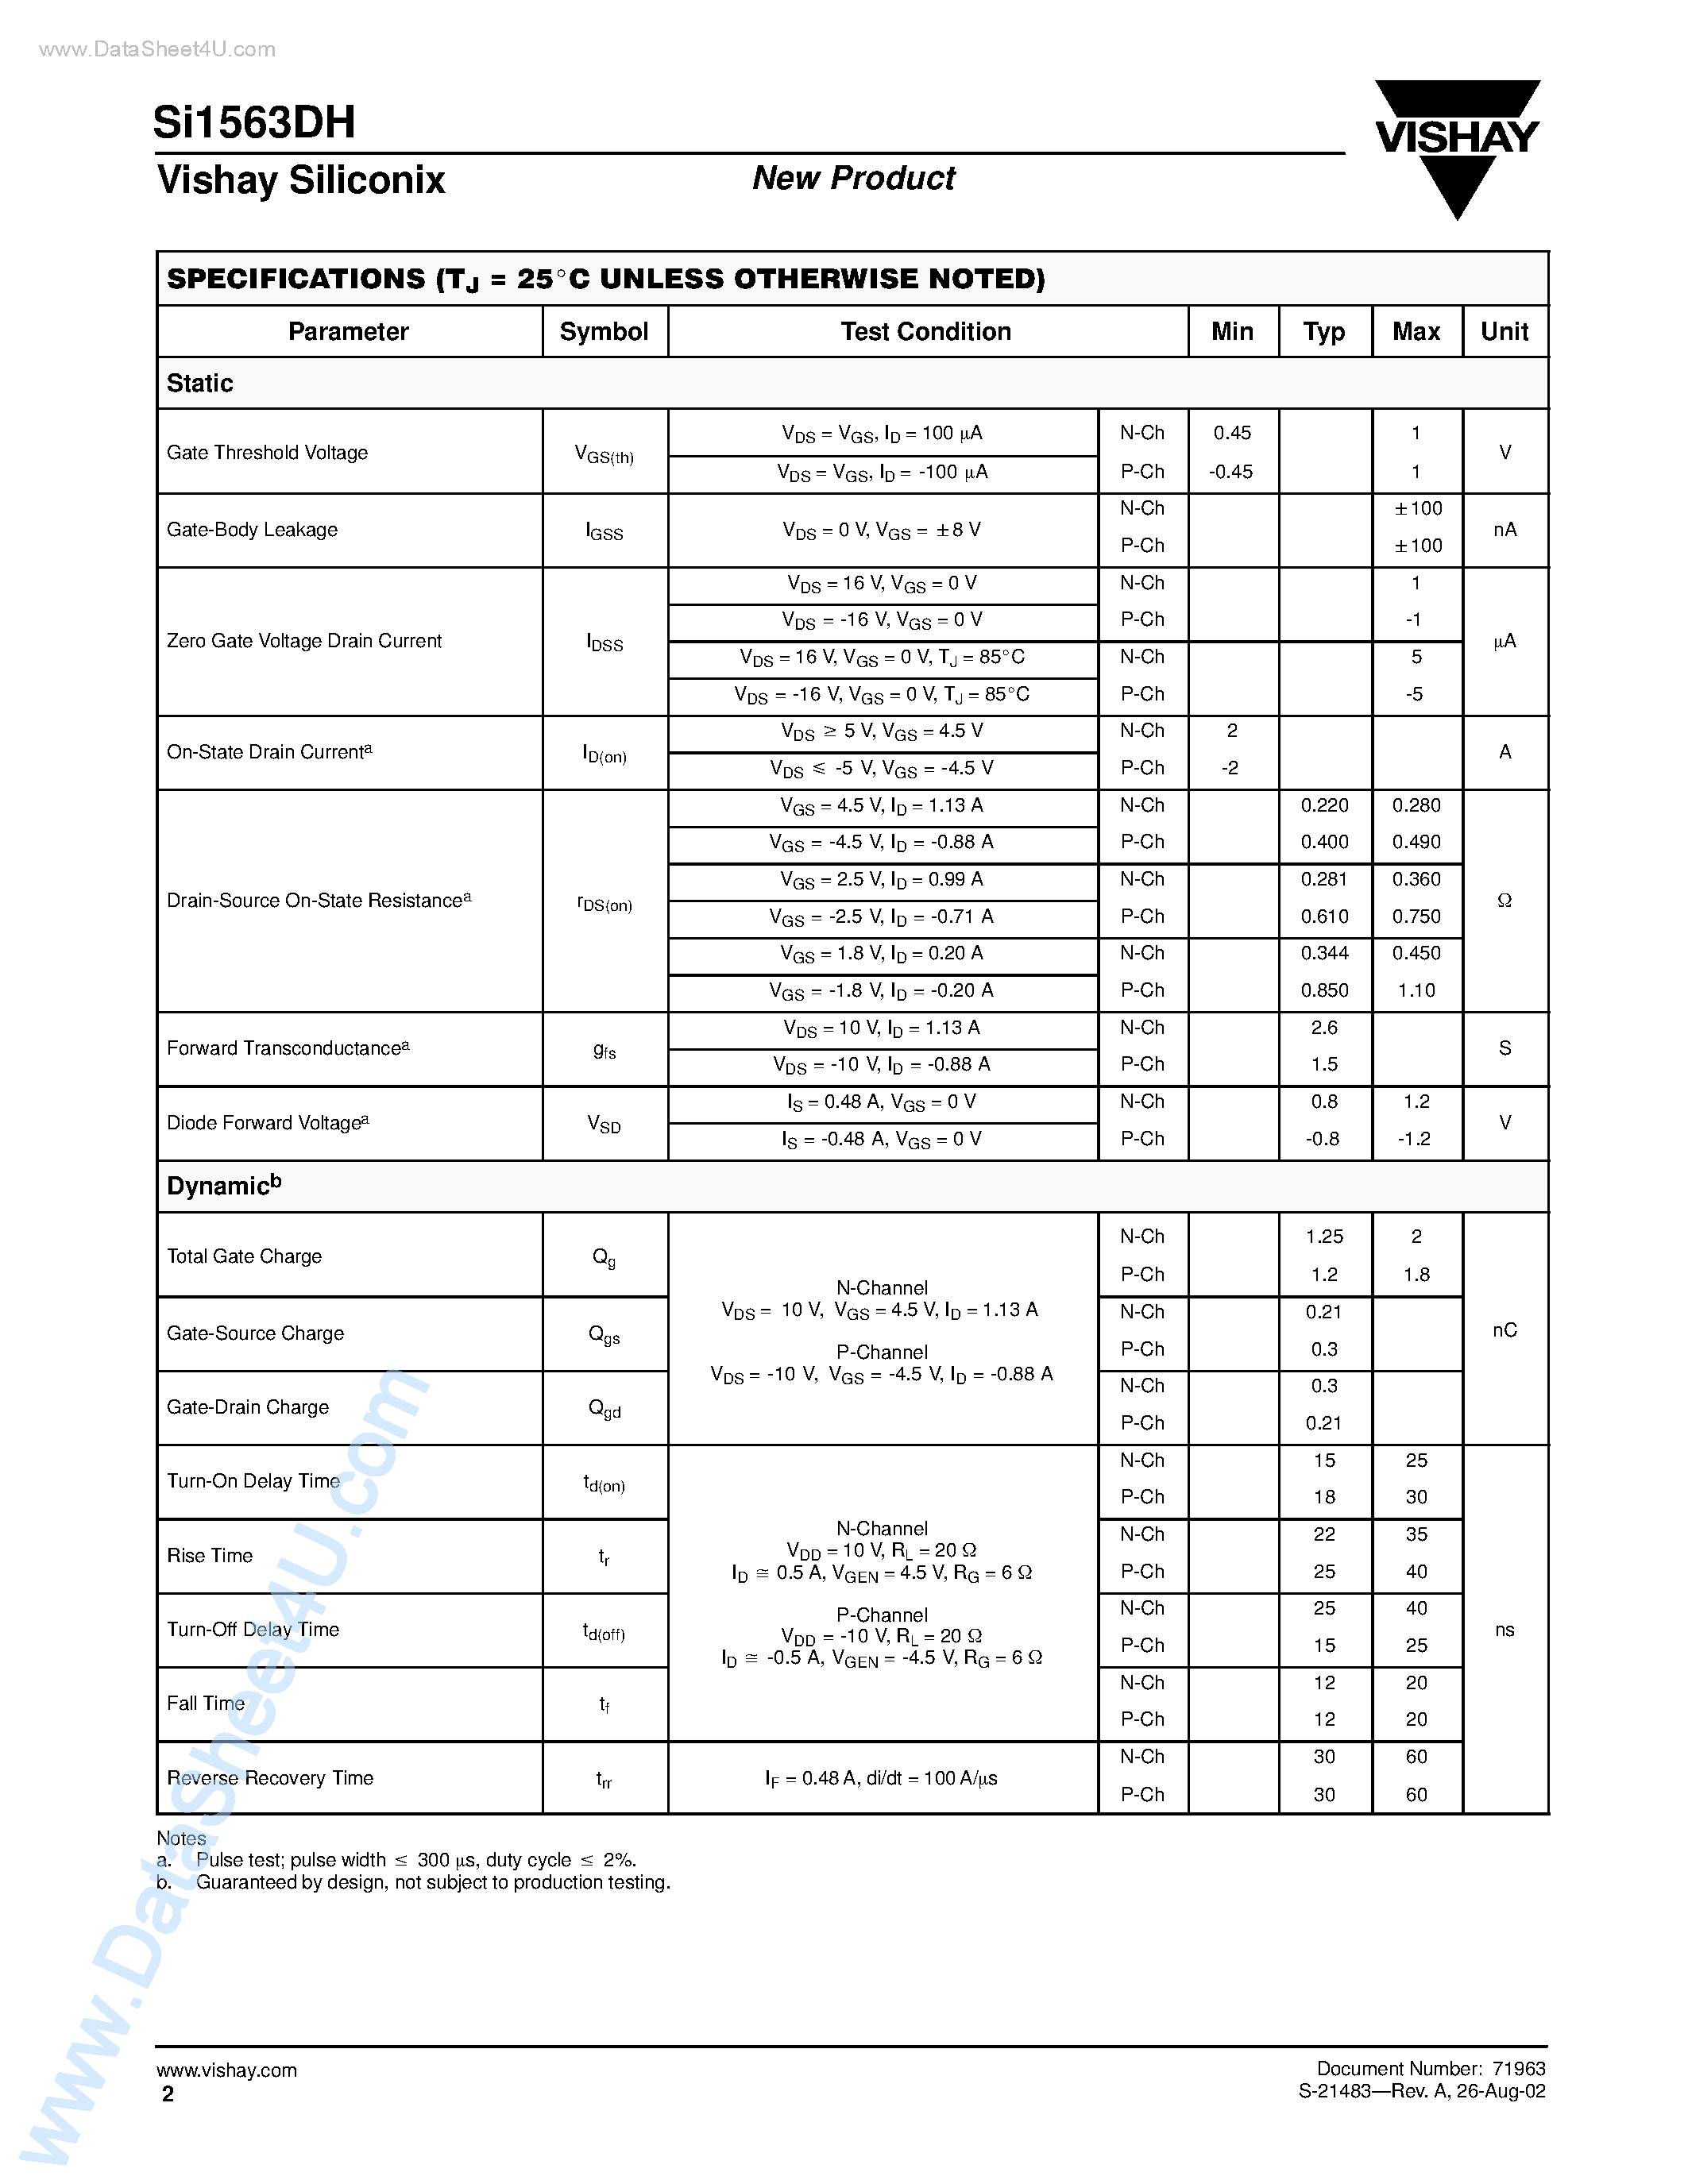 Datasheet SI1563DH - Complementary 20-V (D-S) Low-Threshold MOSFET page 2